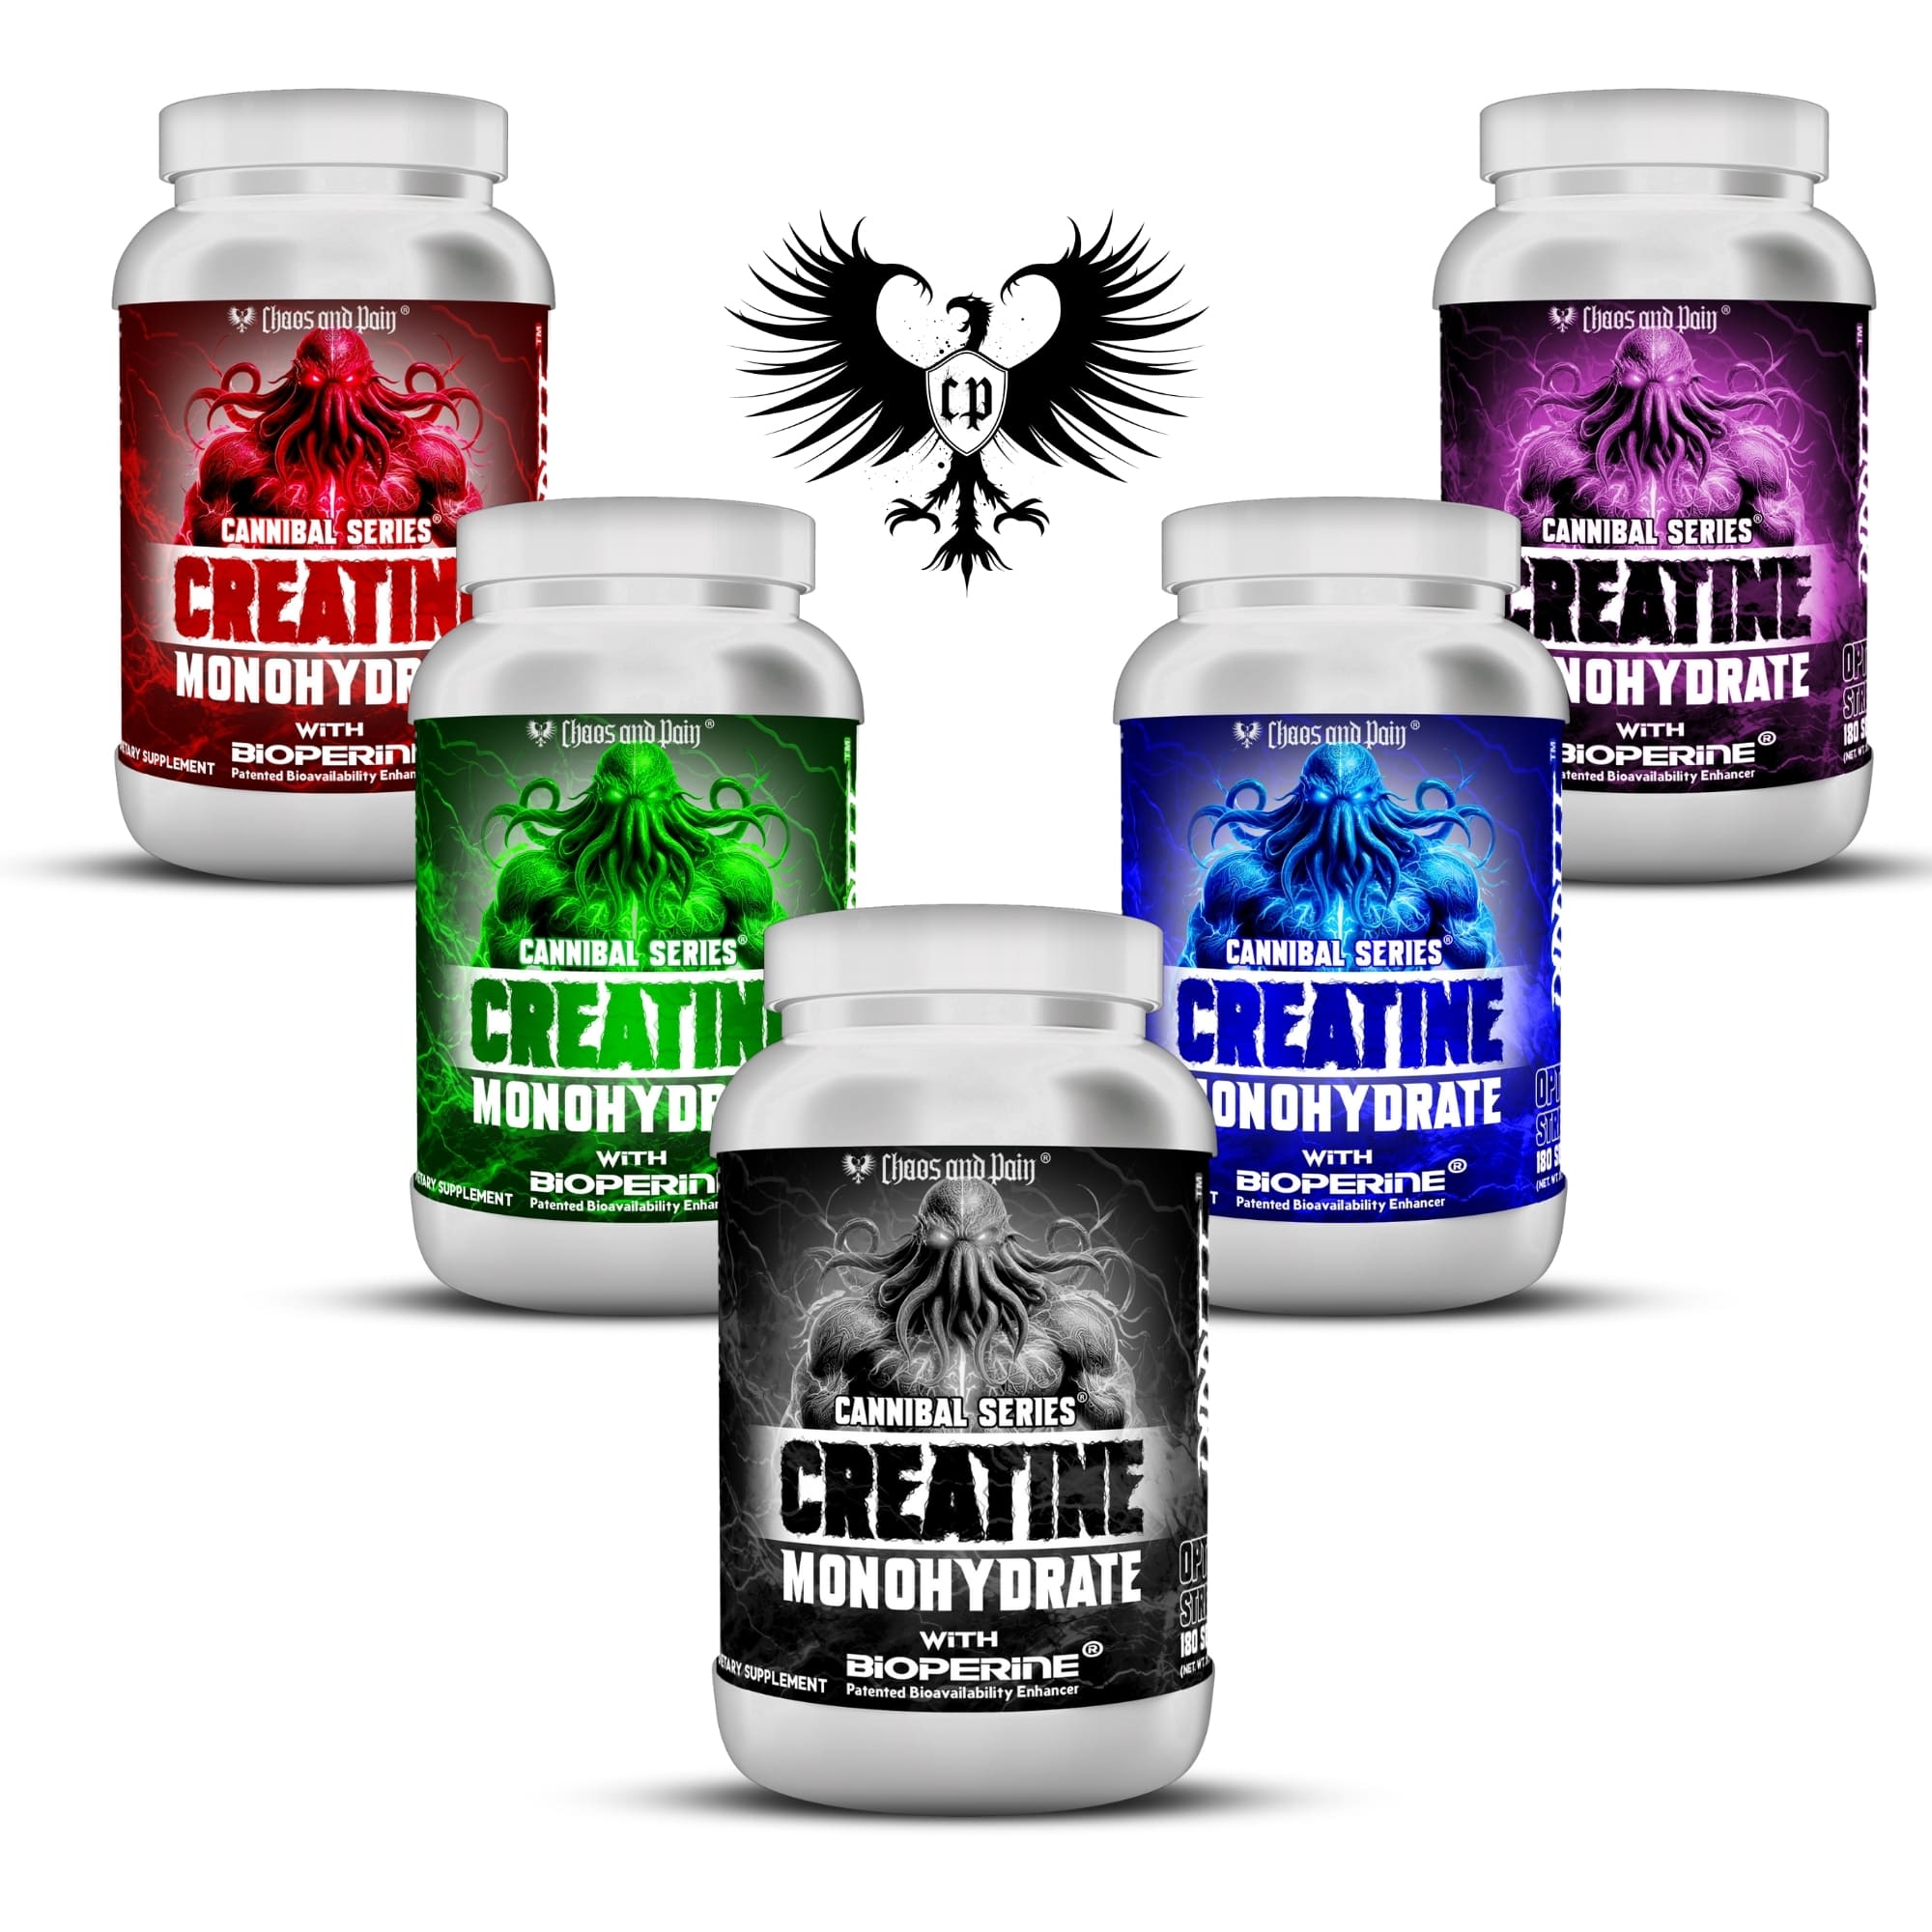 5 colors of creatine